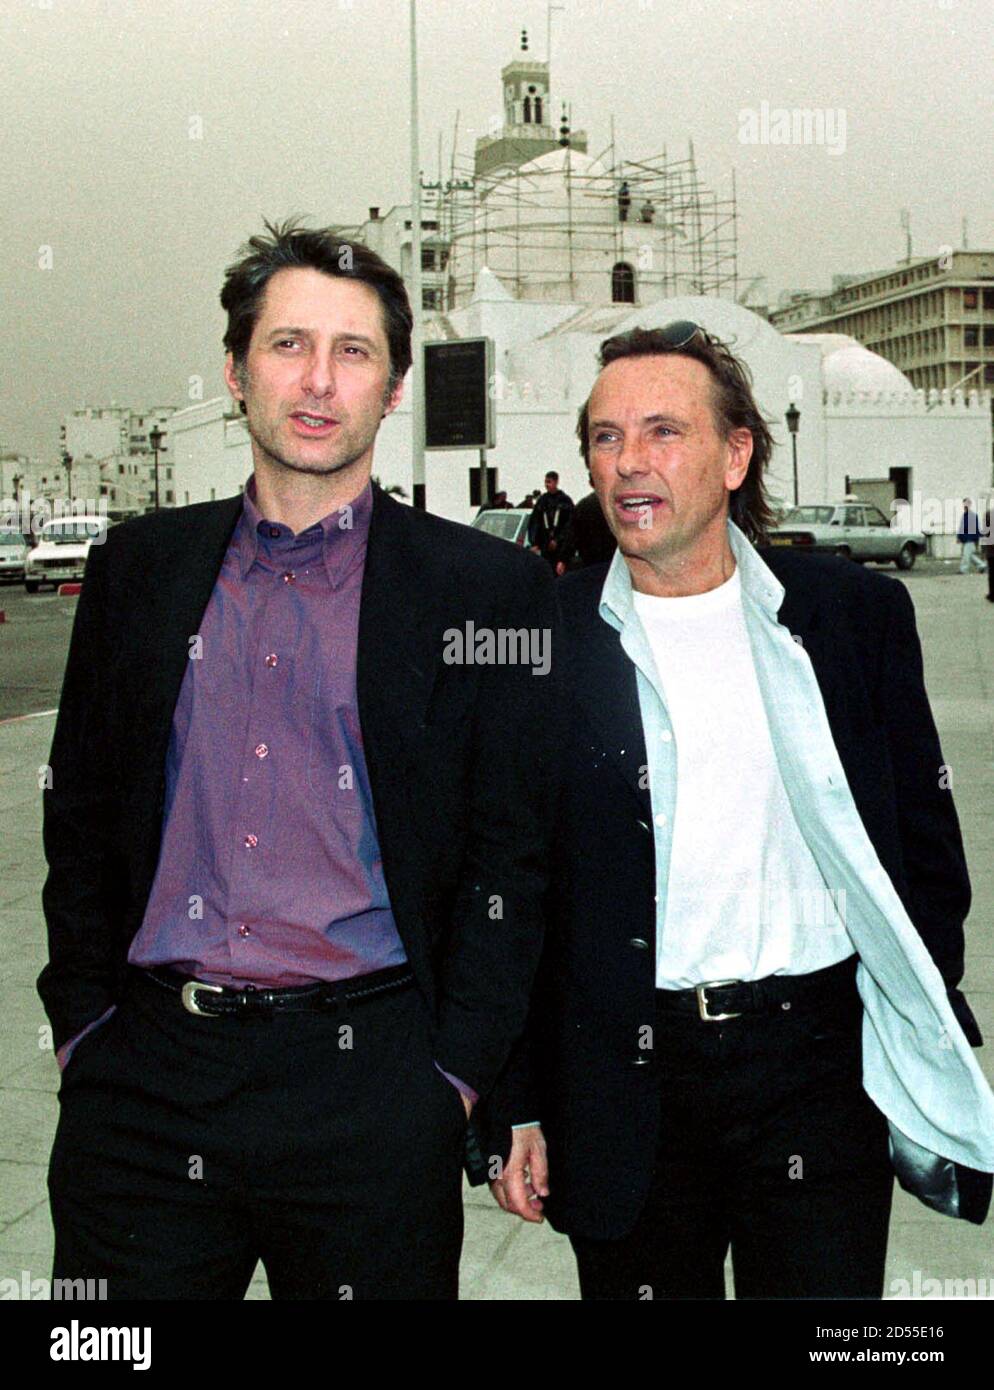 French director Alexandre Arcady (R) and actor Antoine de Caunes (L)  discuss on the Place des Martyrs in Algiers April 8. Arcady de Caunes are  in Algiers for the first screening of